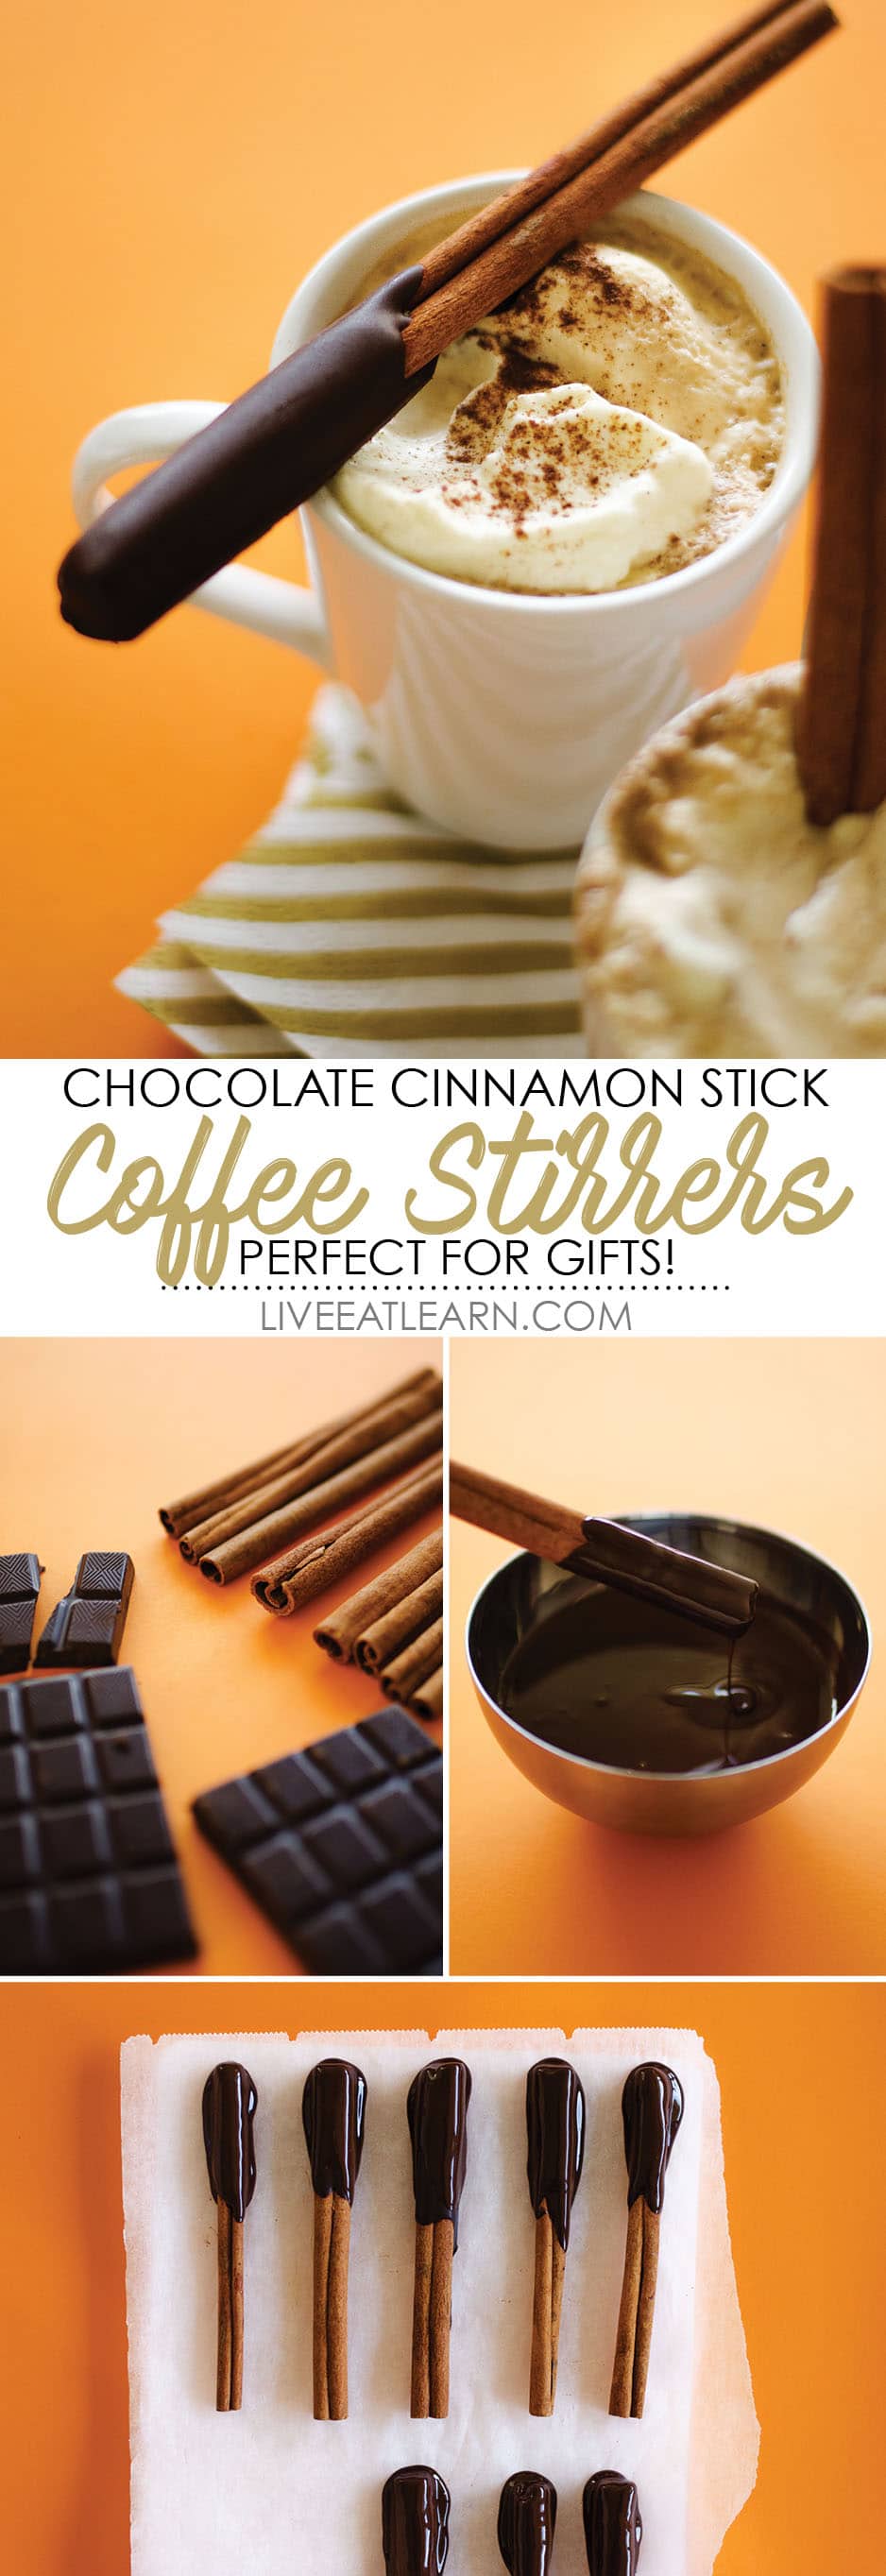 Hot Chocolate Stirrers Recipe A Winter Drink Must Have! Hot